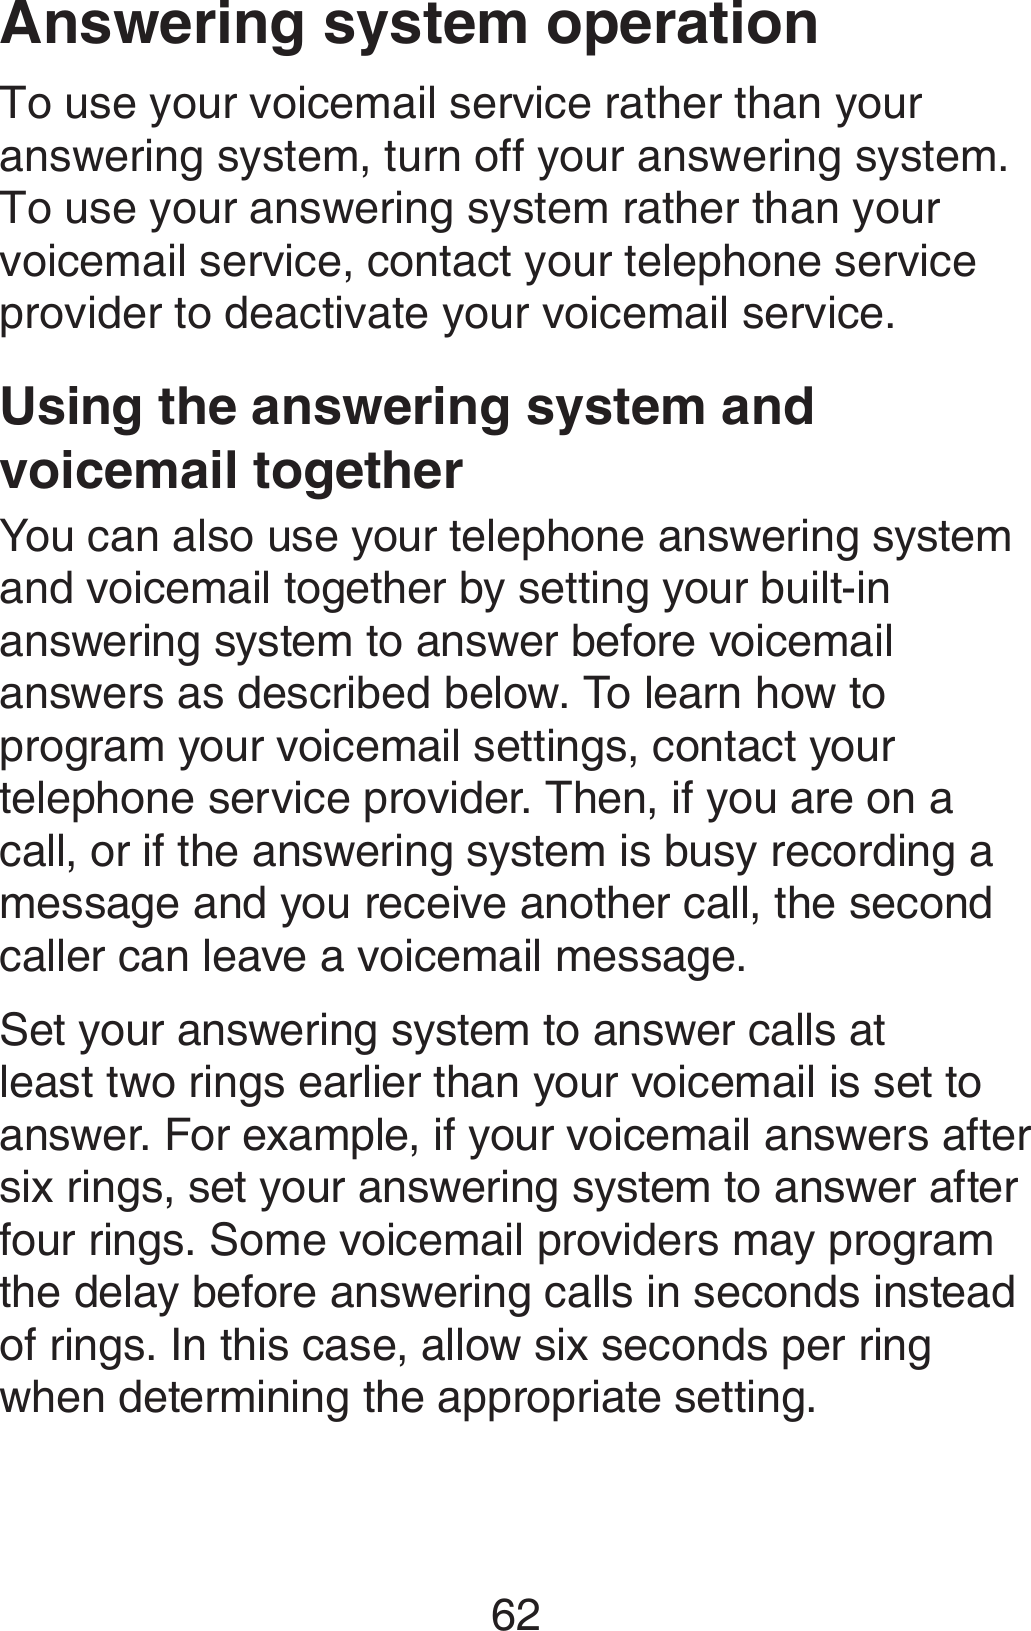 62Answering system operationTo use your voicemail service rather than your answering system, turn off your answering system. To use your answering system rather than your voicemail service, contact your telephone service provider to deactivate your voicemail service. Using the answering system and voicemail togetherYou can also use your telephone answering system and voicemail together by setting your built-in answering system to answer before voicemail answers as described below. To learn how to program your voicemail settings, contact your telephone service provider. Then, if you are on a call, or if the answering system is busy recording a message and you receive another call, the second caller can leave a voicemail message.Set your answering system to answer calls at least two rings earlier than your voicemail is set to answer. For example, if your voicemail answers after six rings, set your answering system to answer after four rings. Some voicemail providers may program the delay before answering calls in seconds instead of rings. In this case, allow six seconds per ring when determining the appropriate setting.